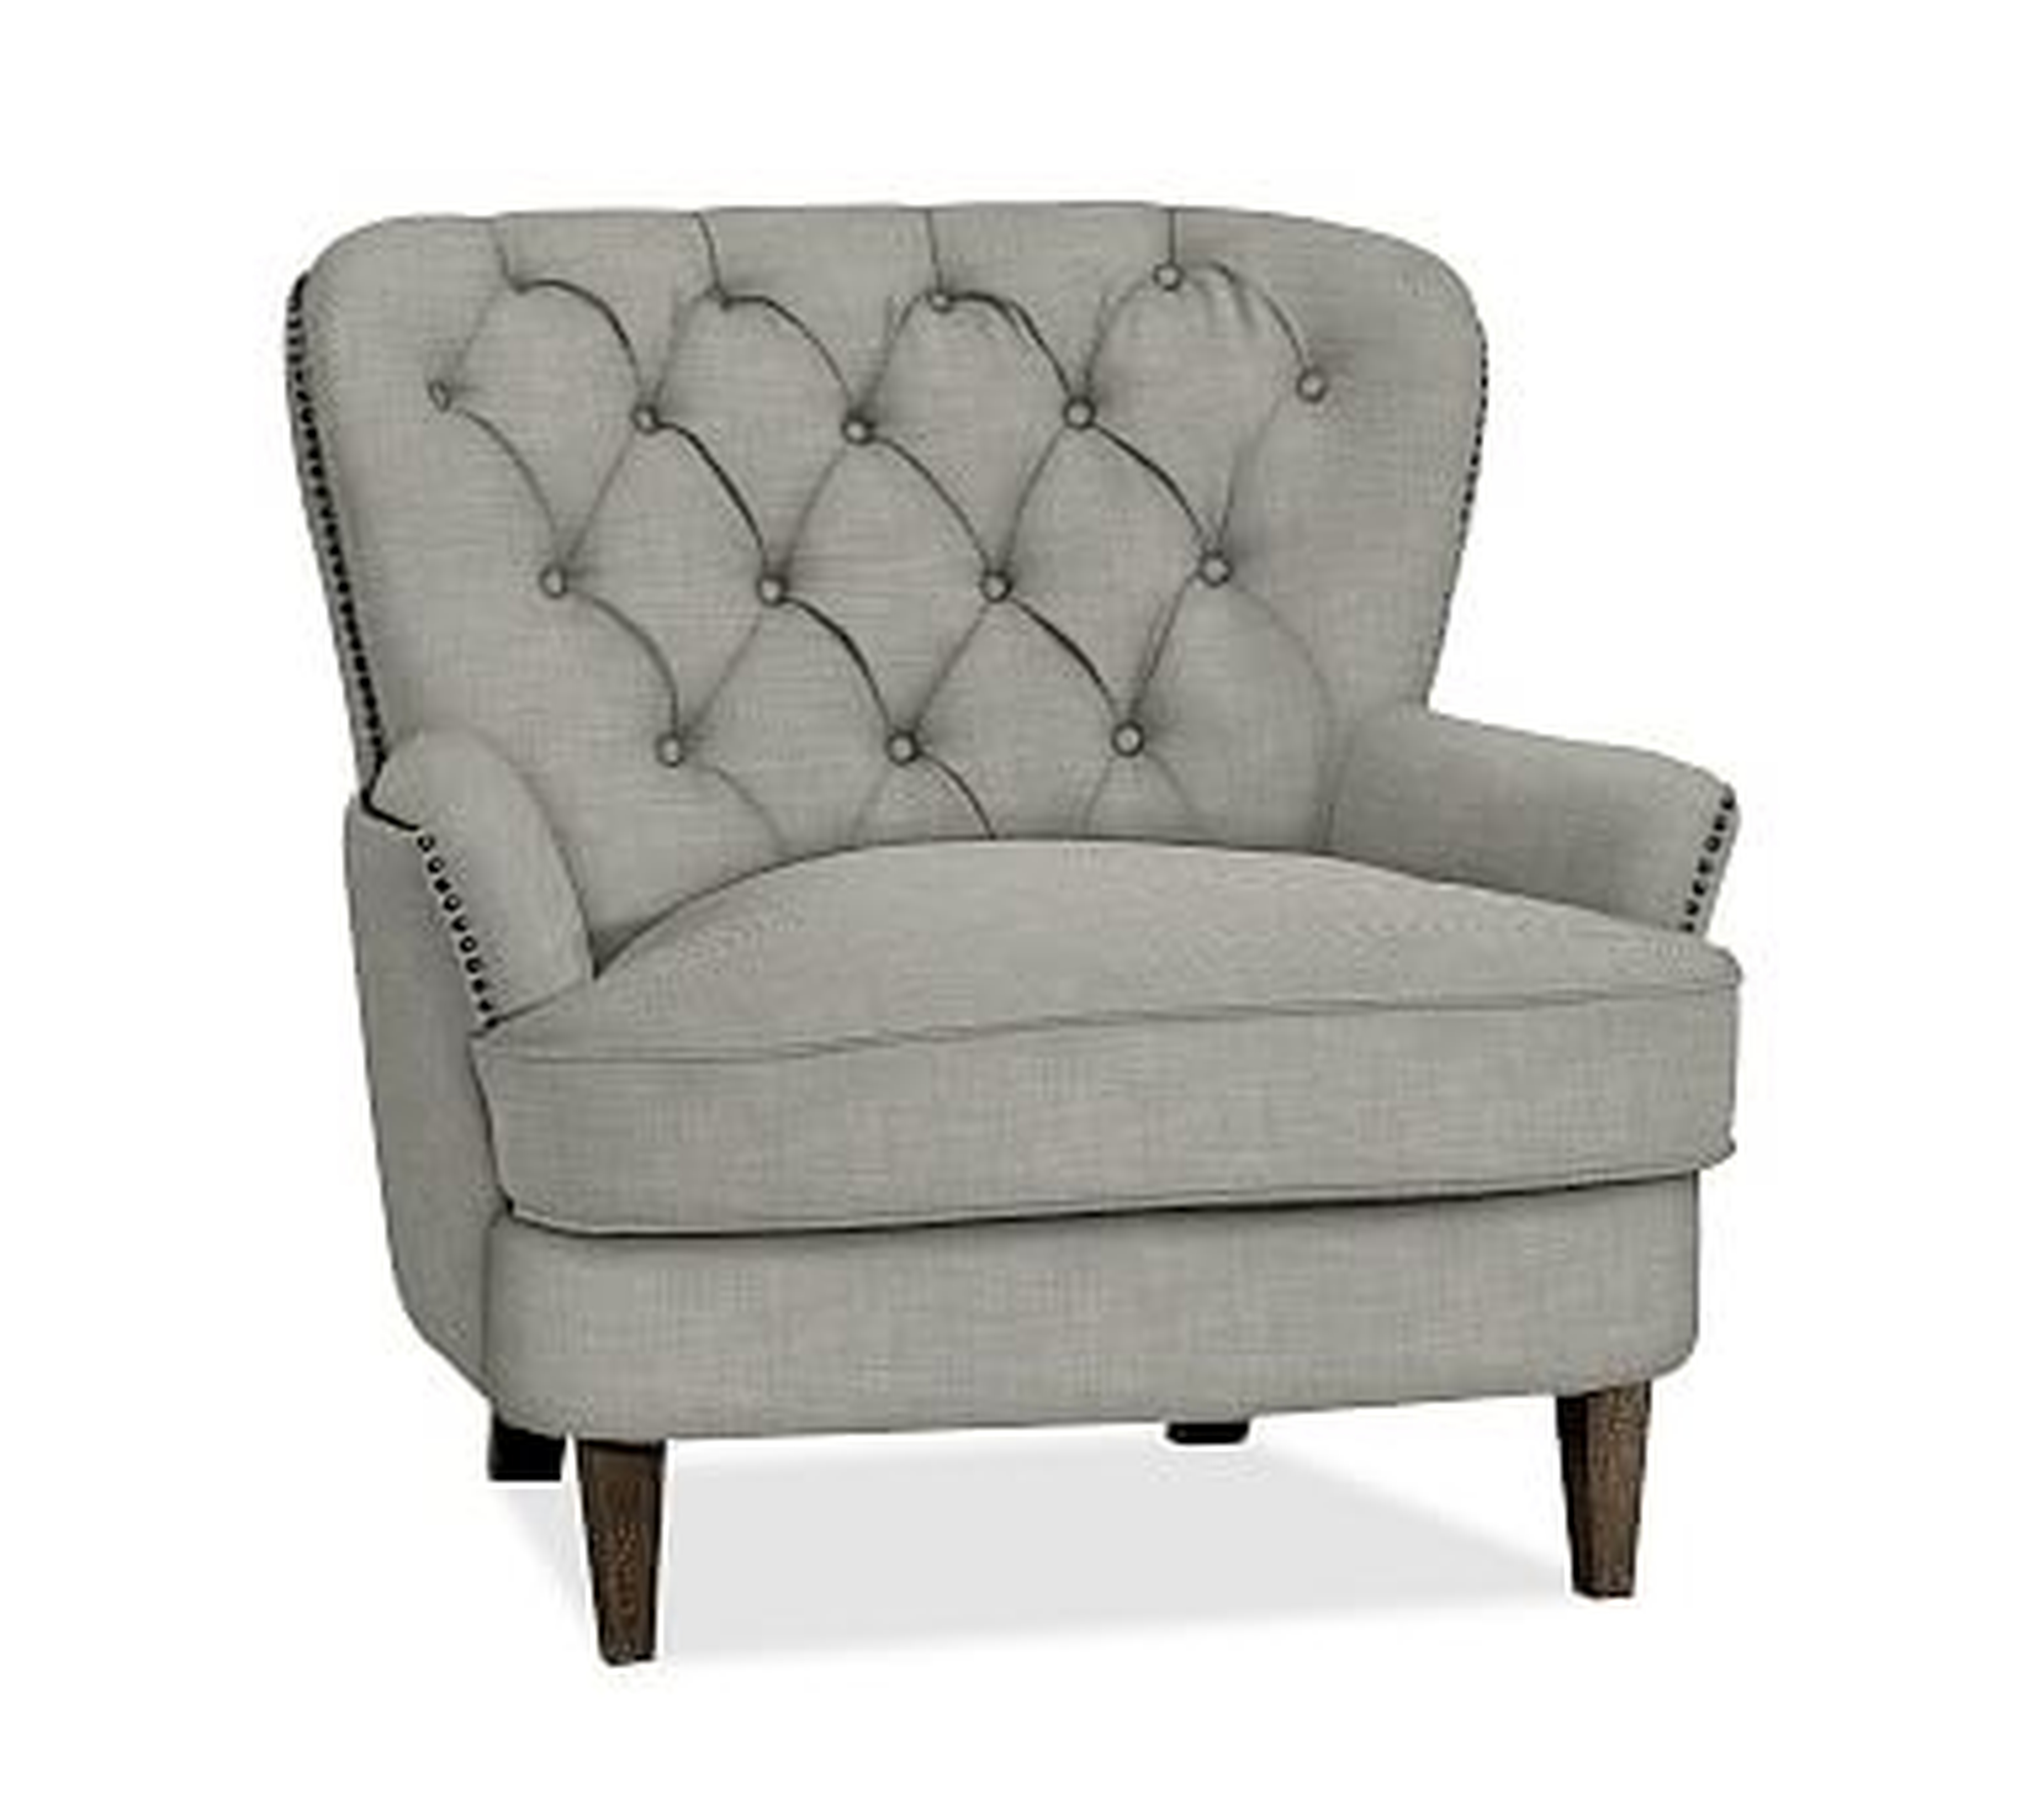 Cardiff Tufted Upholstered Armchair with Nailheads, Polyester Wrapped Cushions, Premium Performance Basketweave Light Gray - Pottery Barn